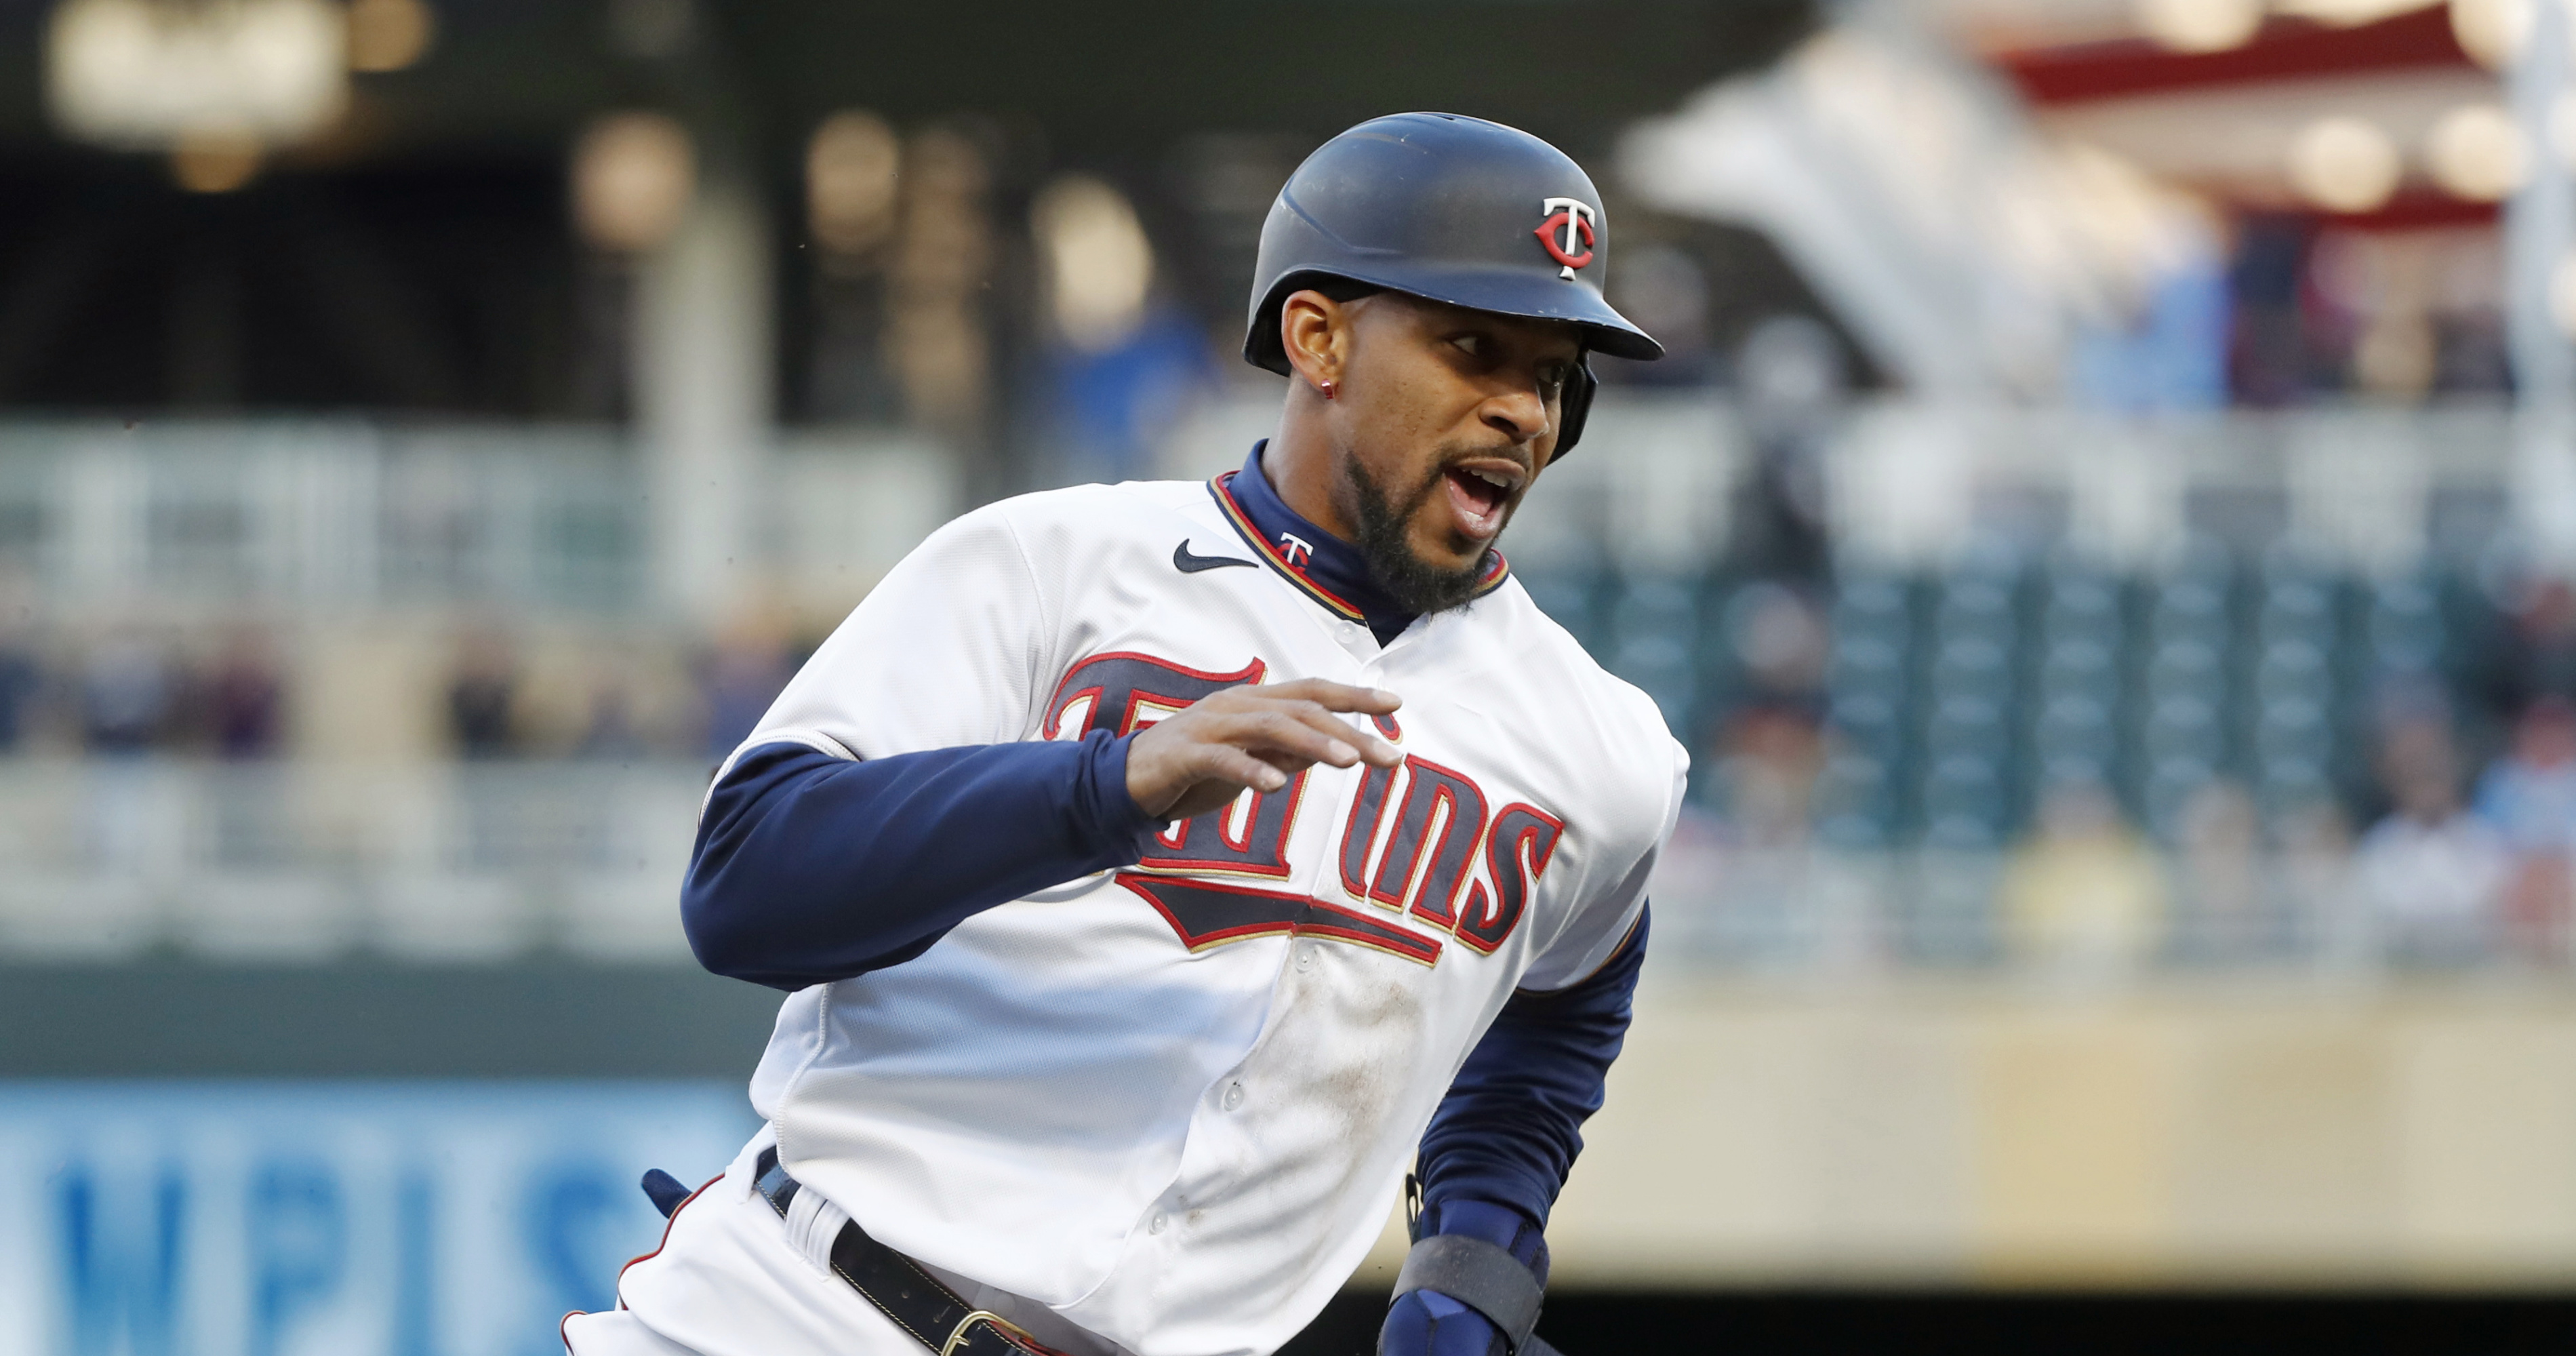 MLB on FOX - WHAT A GAME for Minnesota Twins OF Byron Buxton